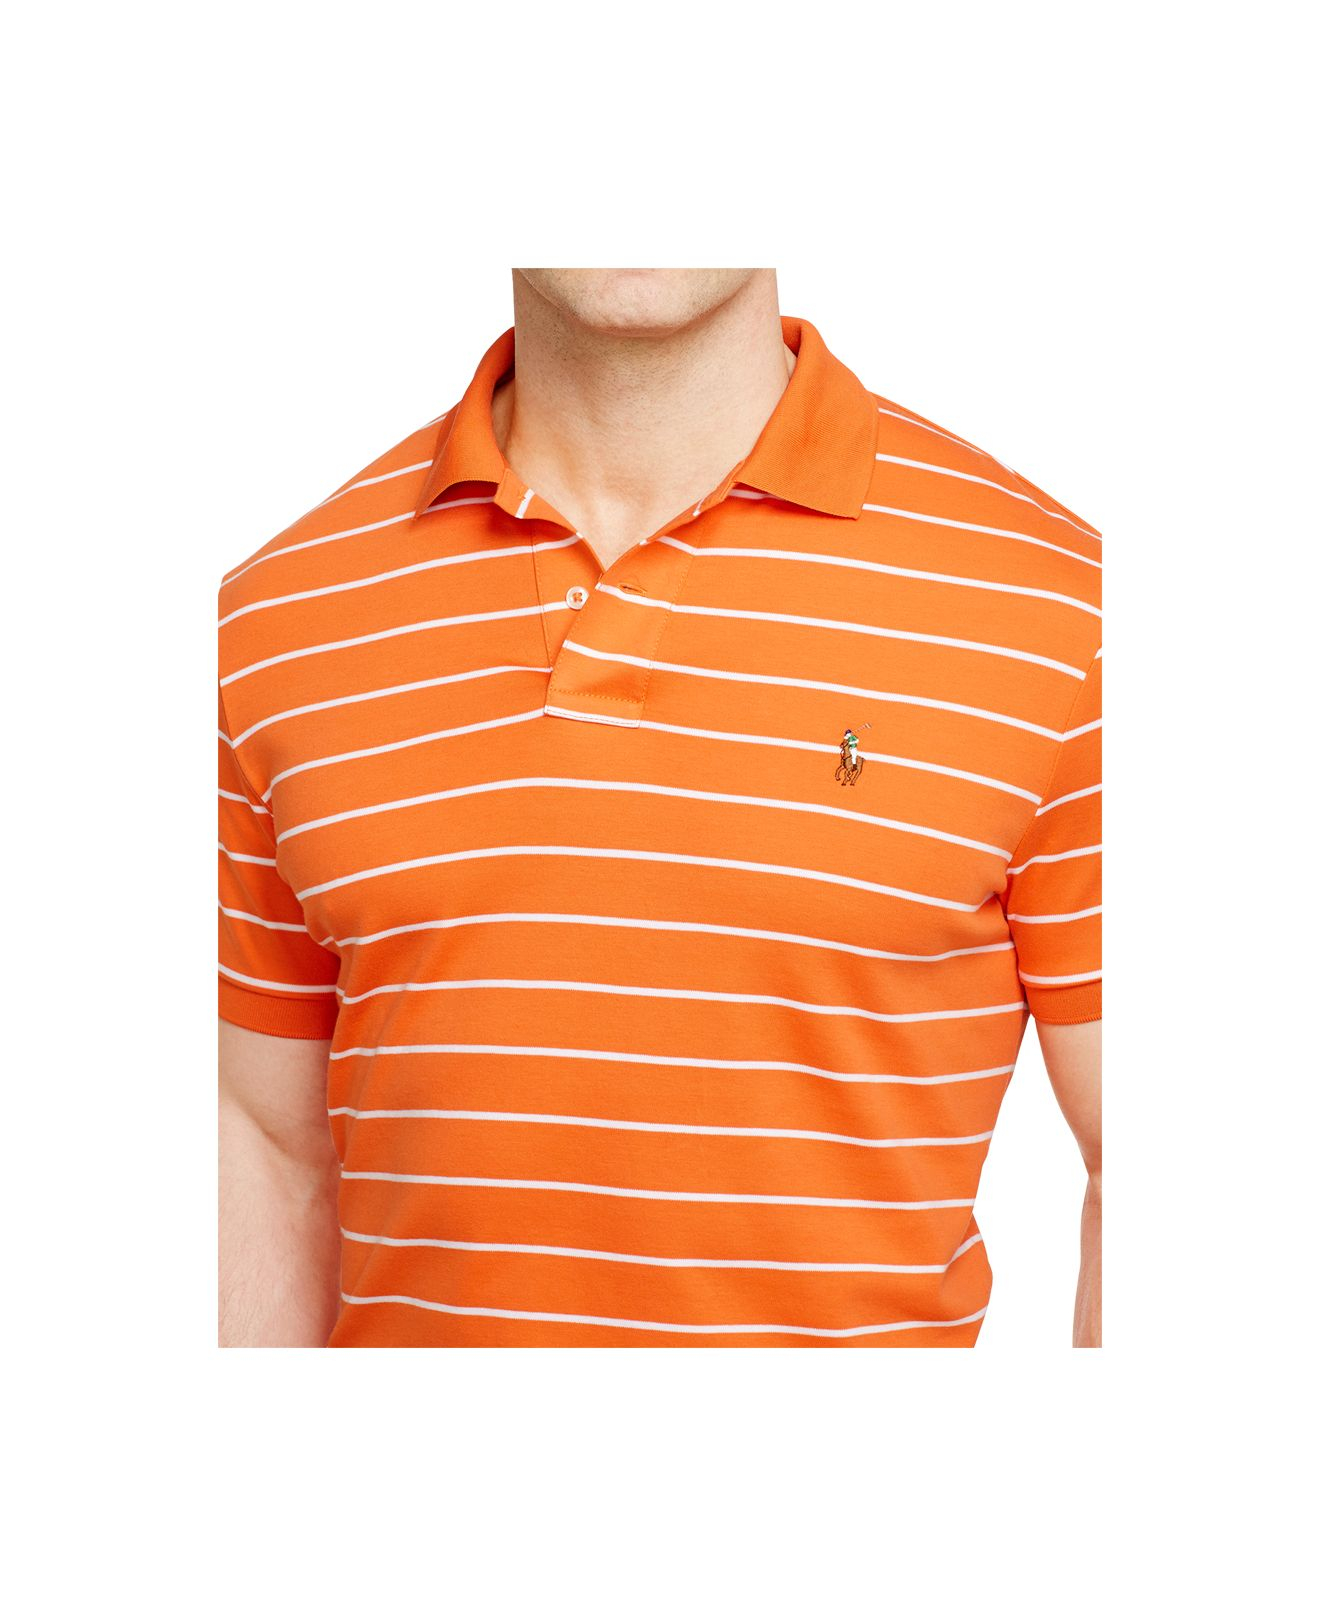 Polo Ralph Lauren Orange Striped Pima Soft Touch Polo Shirt Product 1 879328721 Normal 